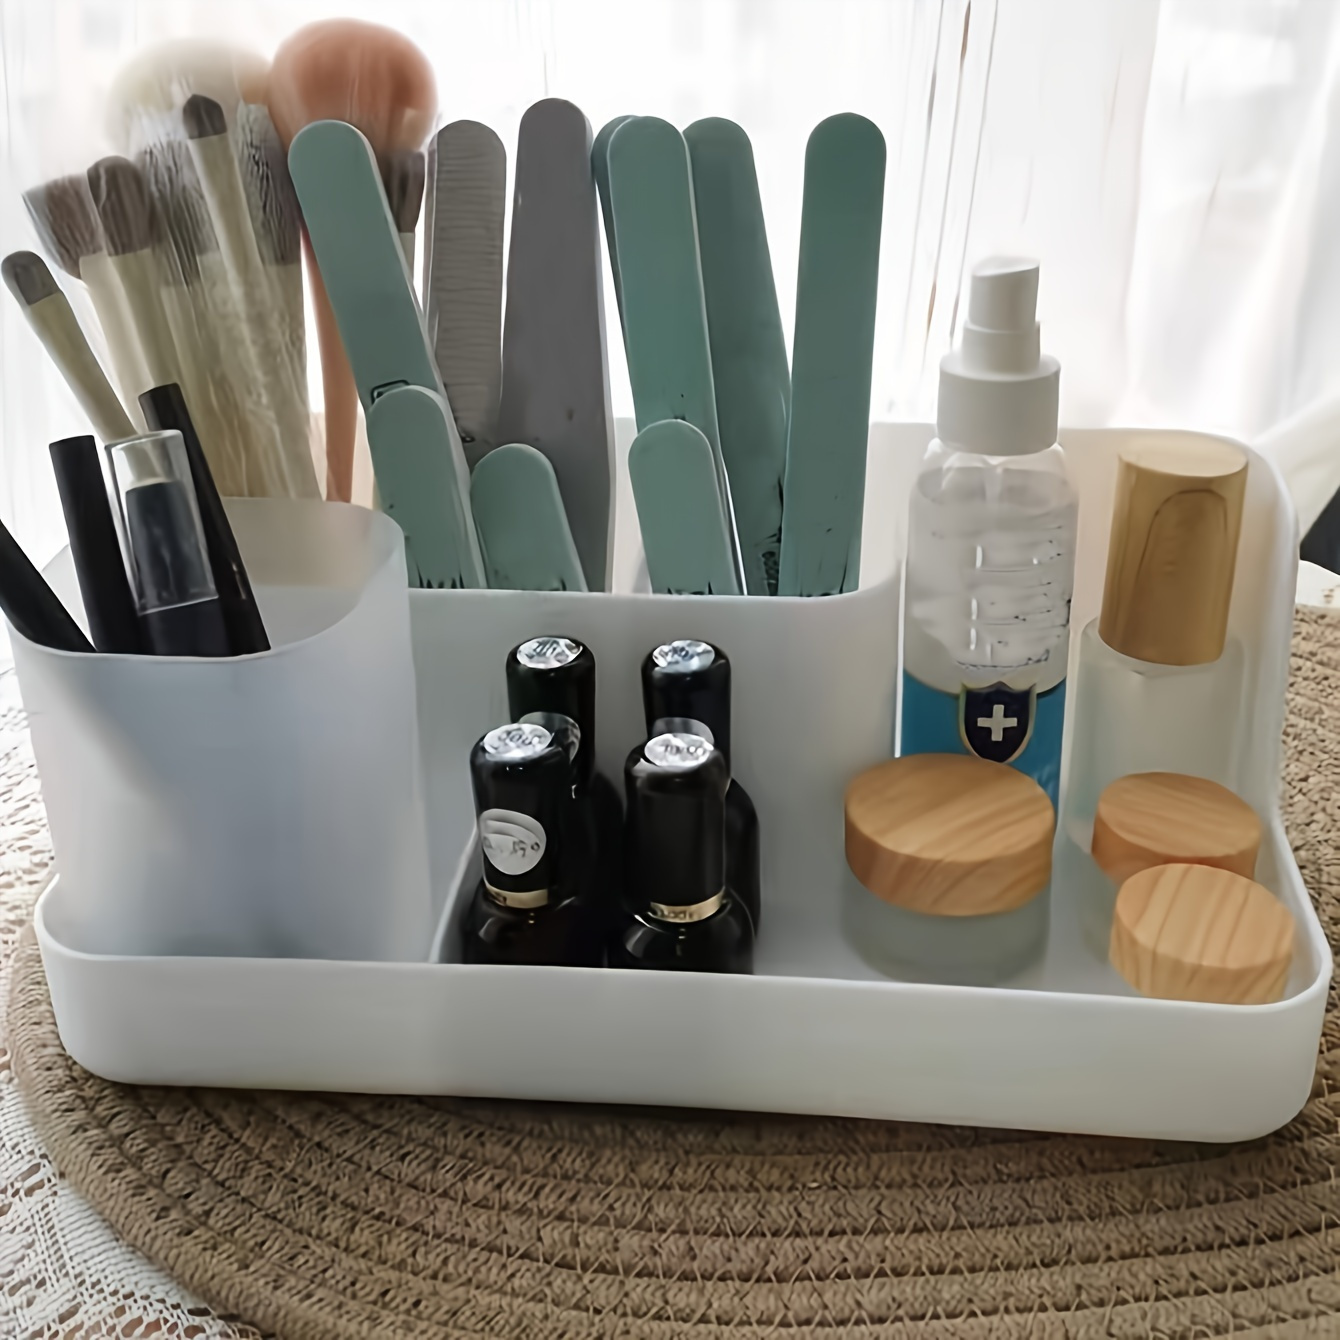 Makeup Organizer, Waterproof&Dustproof Cosmetic Organizer Box with Lid  Fully Open Makeup Display Boxes, Skincare Organizers Makeup Caddy Holder  for Bathroom, Dresser, Countertop Bedroom